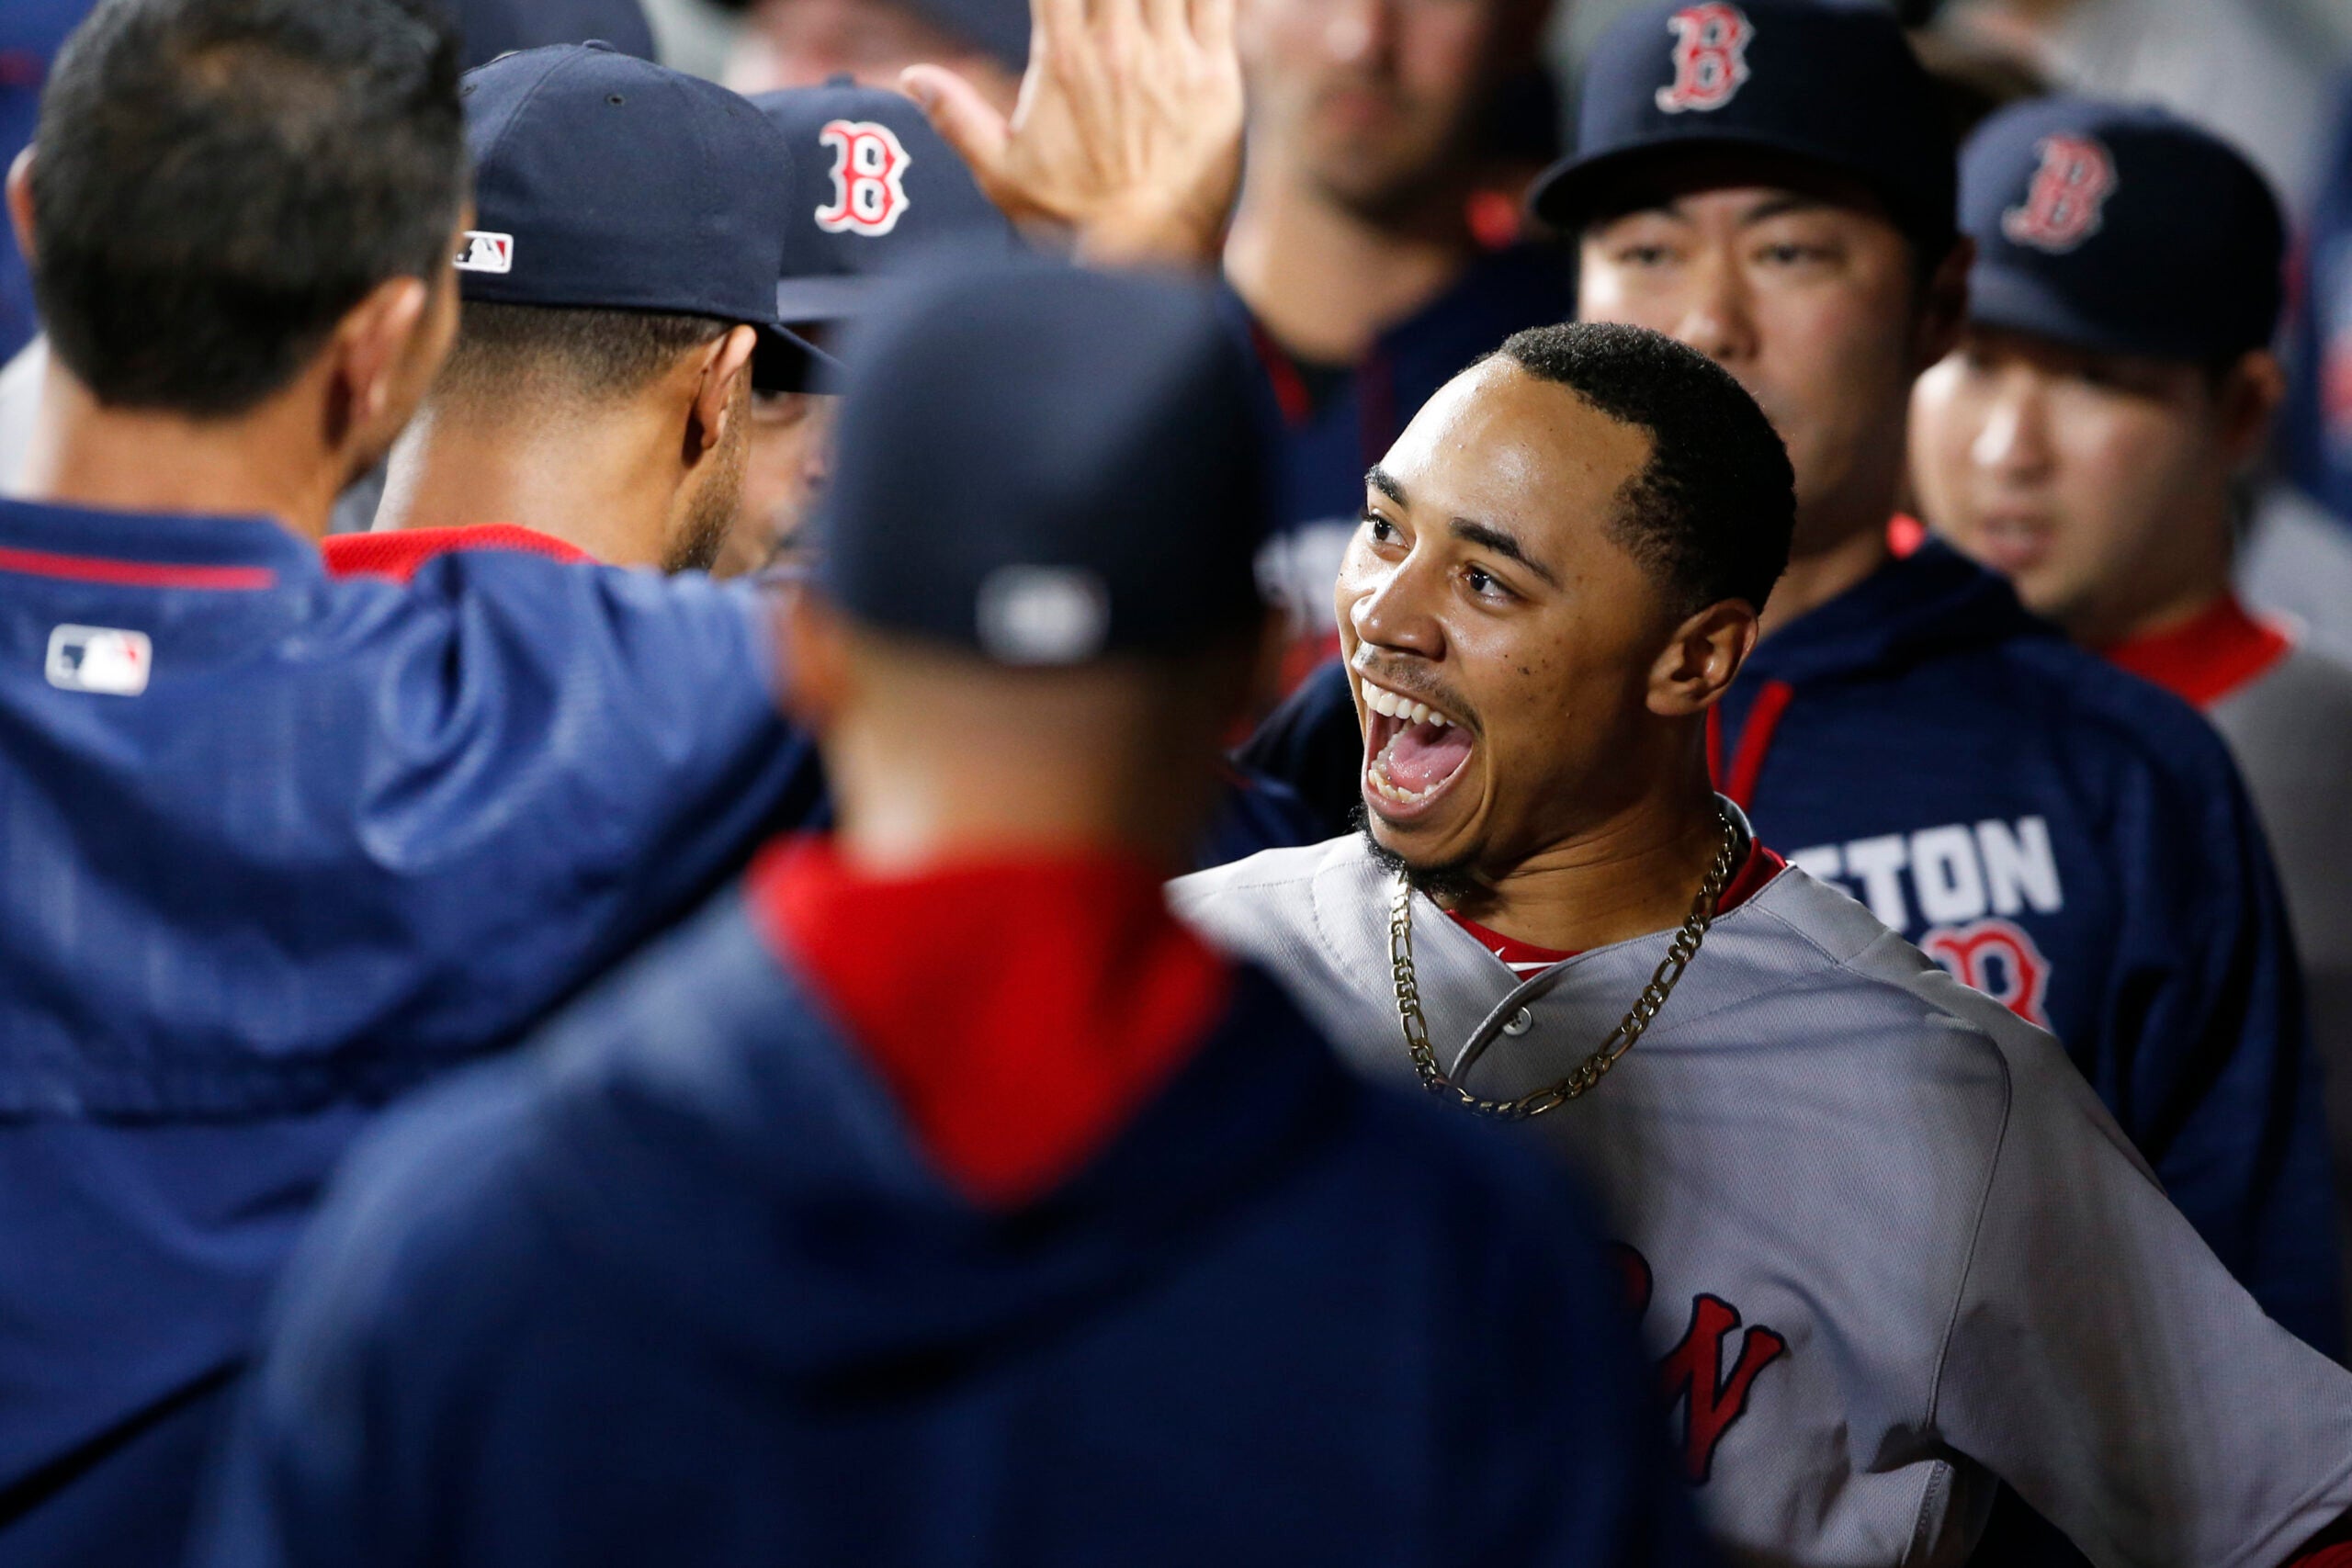 Red Sox' Mookie Betts is the real deal